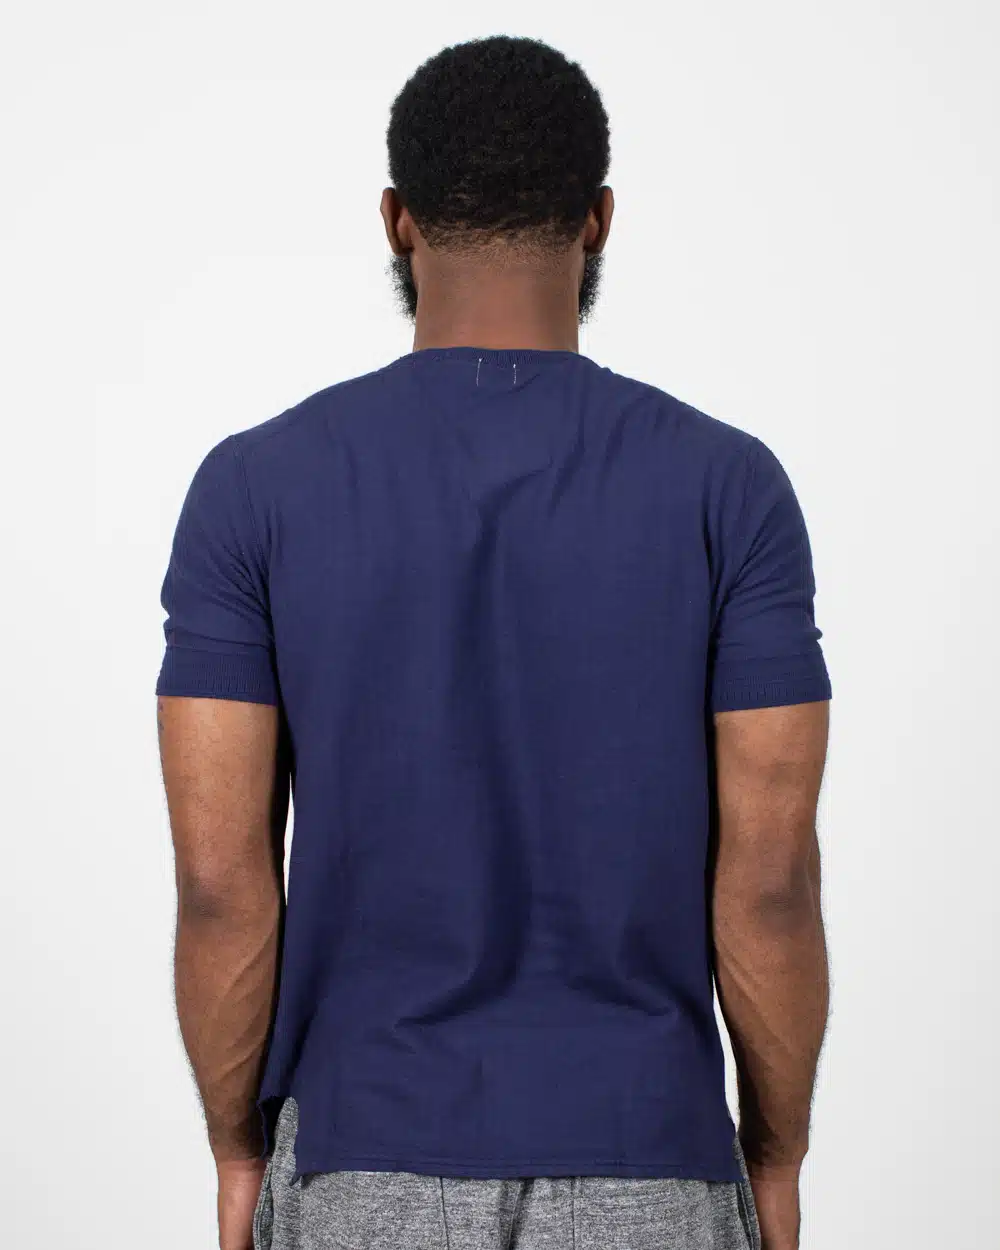 Loop & Weft Ribbed Military Crewneck - French Navy Blue